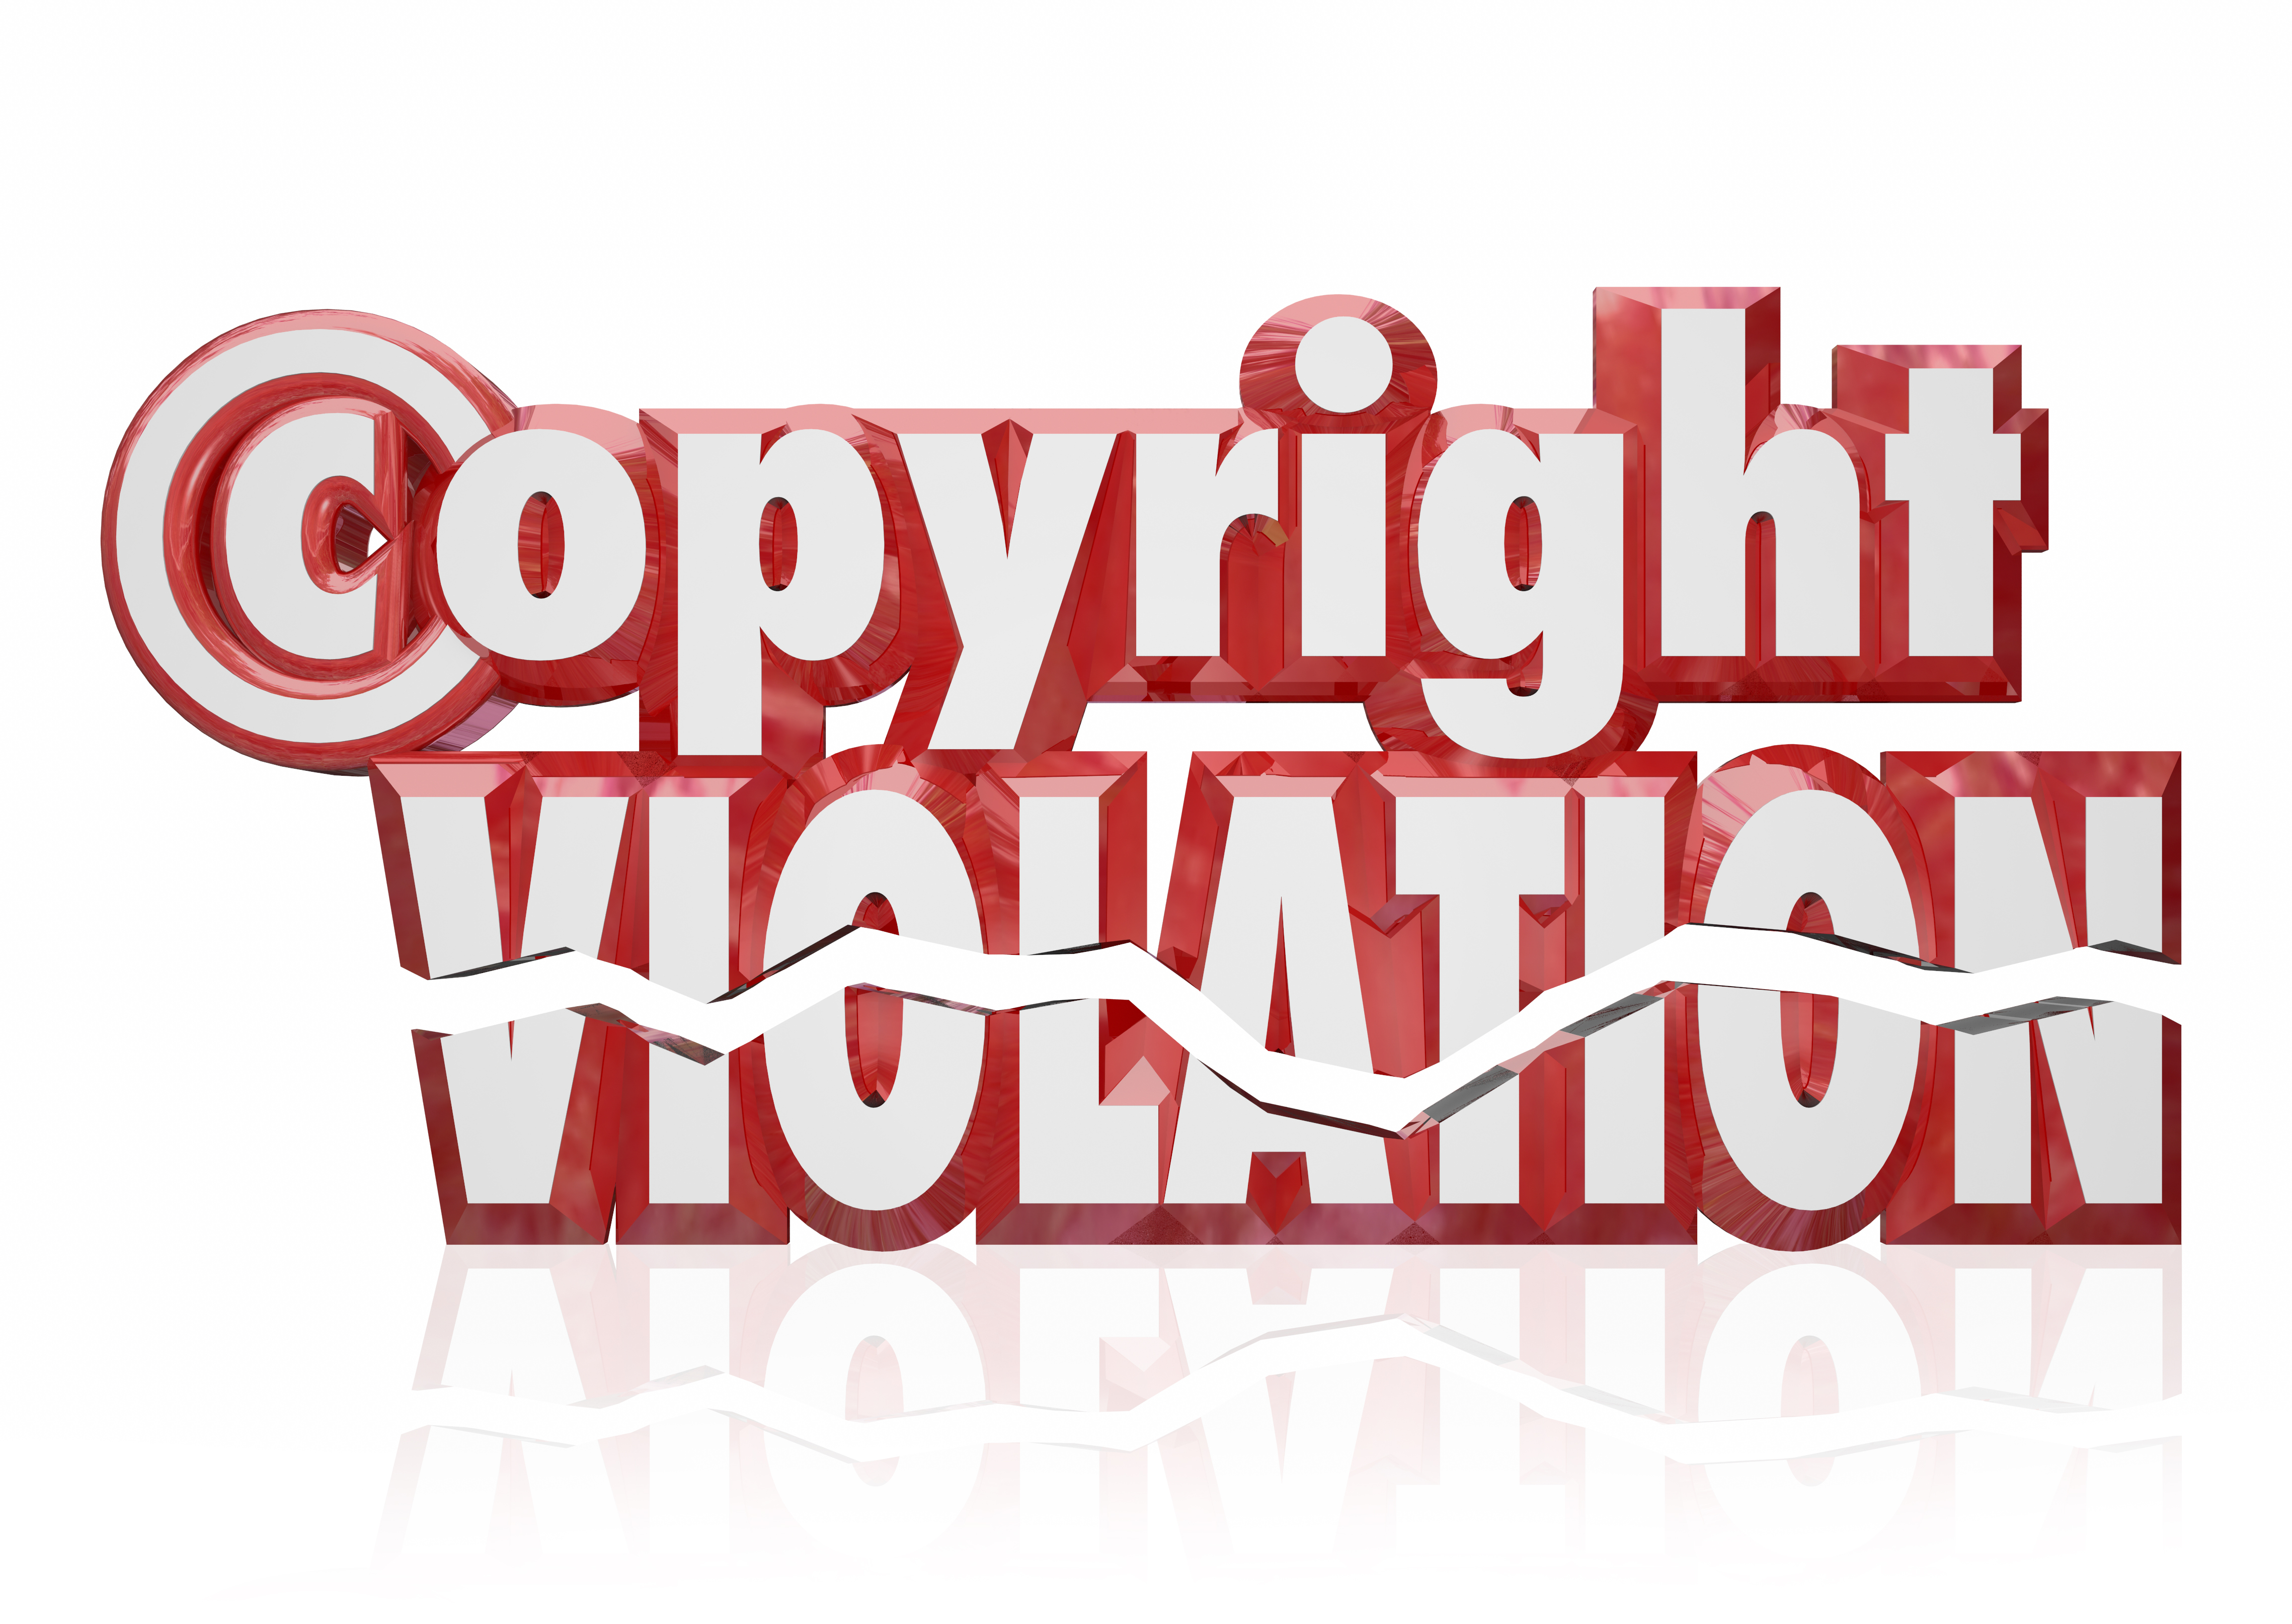 Using illegal images and content on blogs and social media. You are